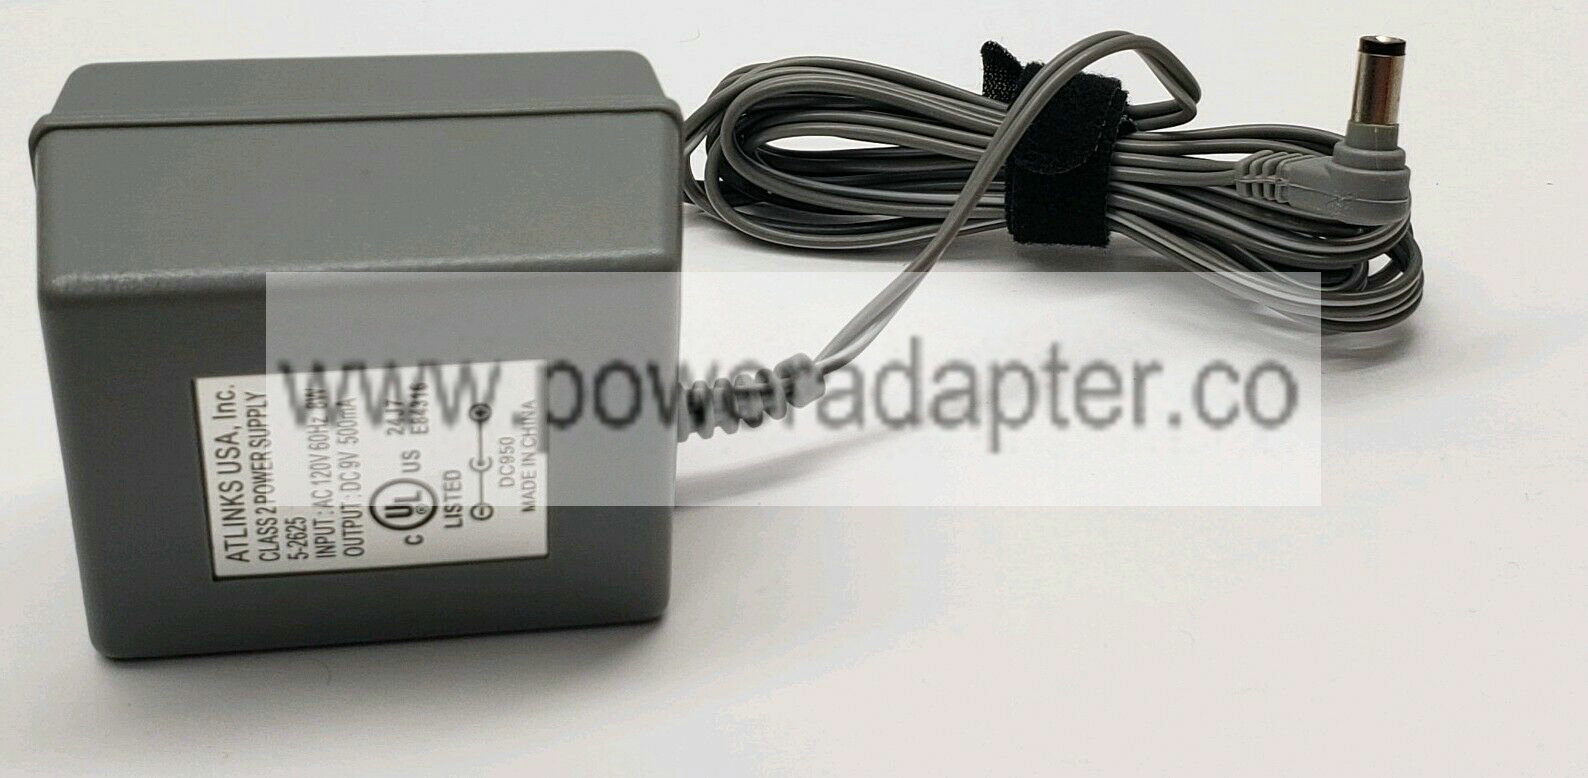 Atlinks 5-2625 AC Power Supply Adapter Charger Output: 9V 500mA Tested Works Brand: Atlinks Country/Region of Manuf